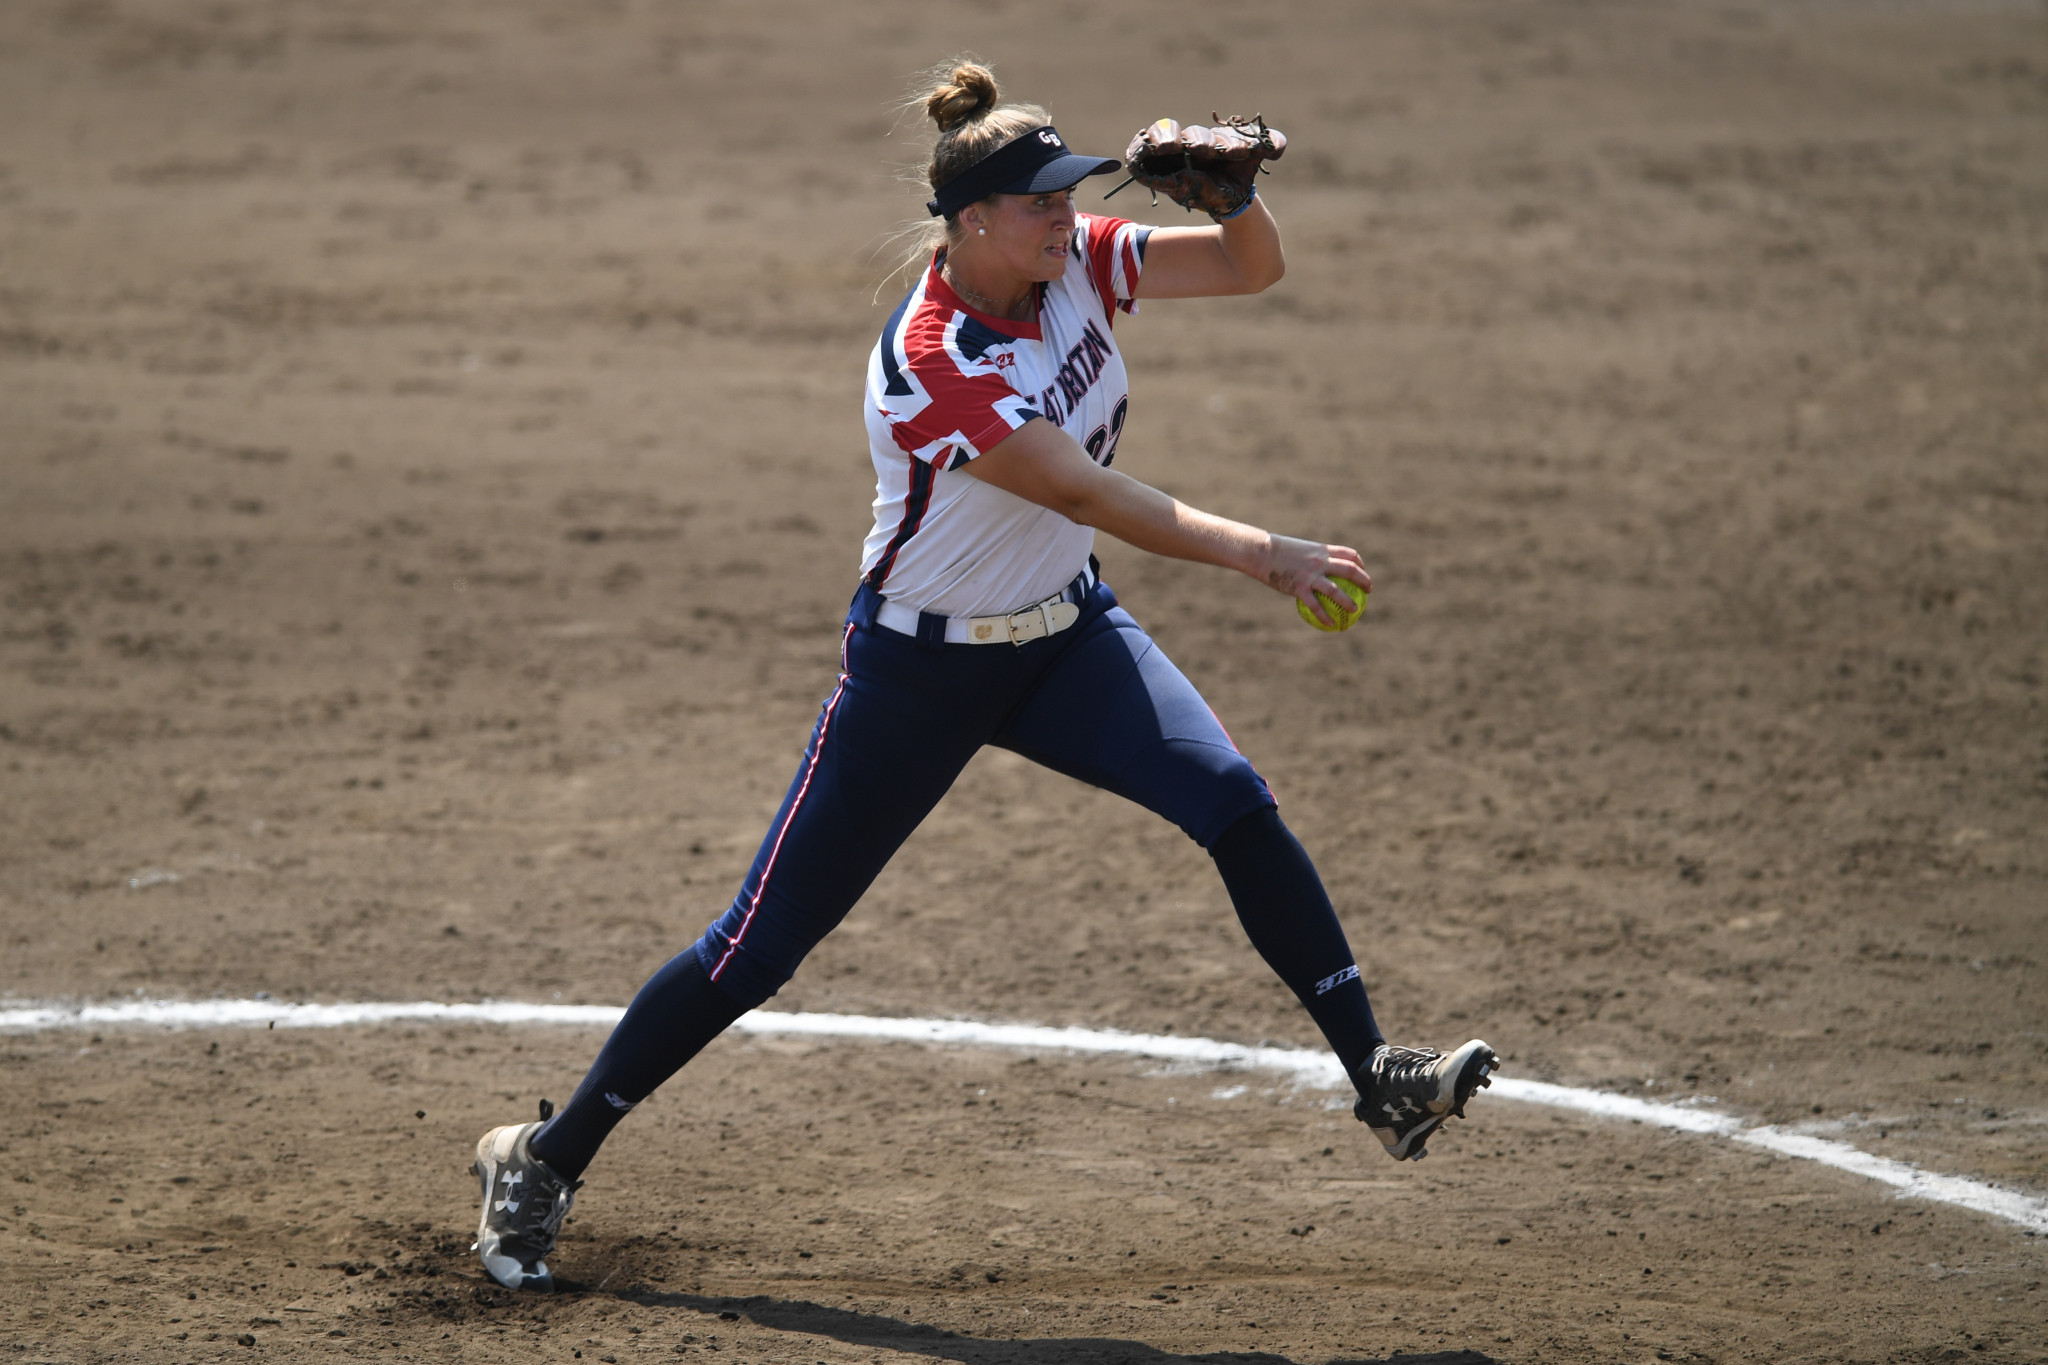 Britain's women's softball team is one of the best in Europe ©Getty Images